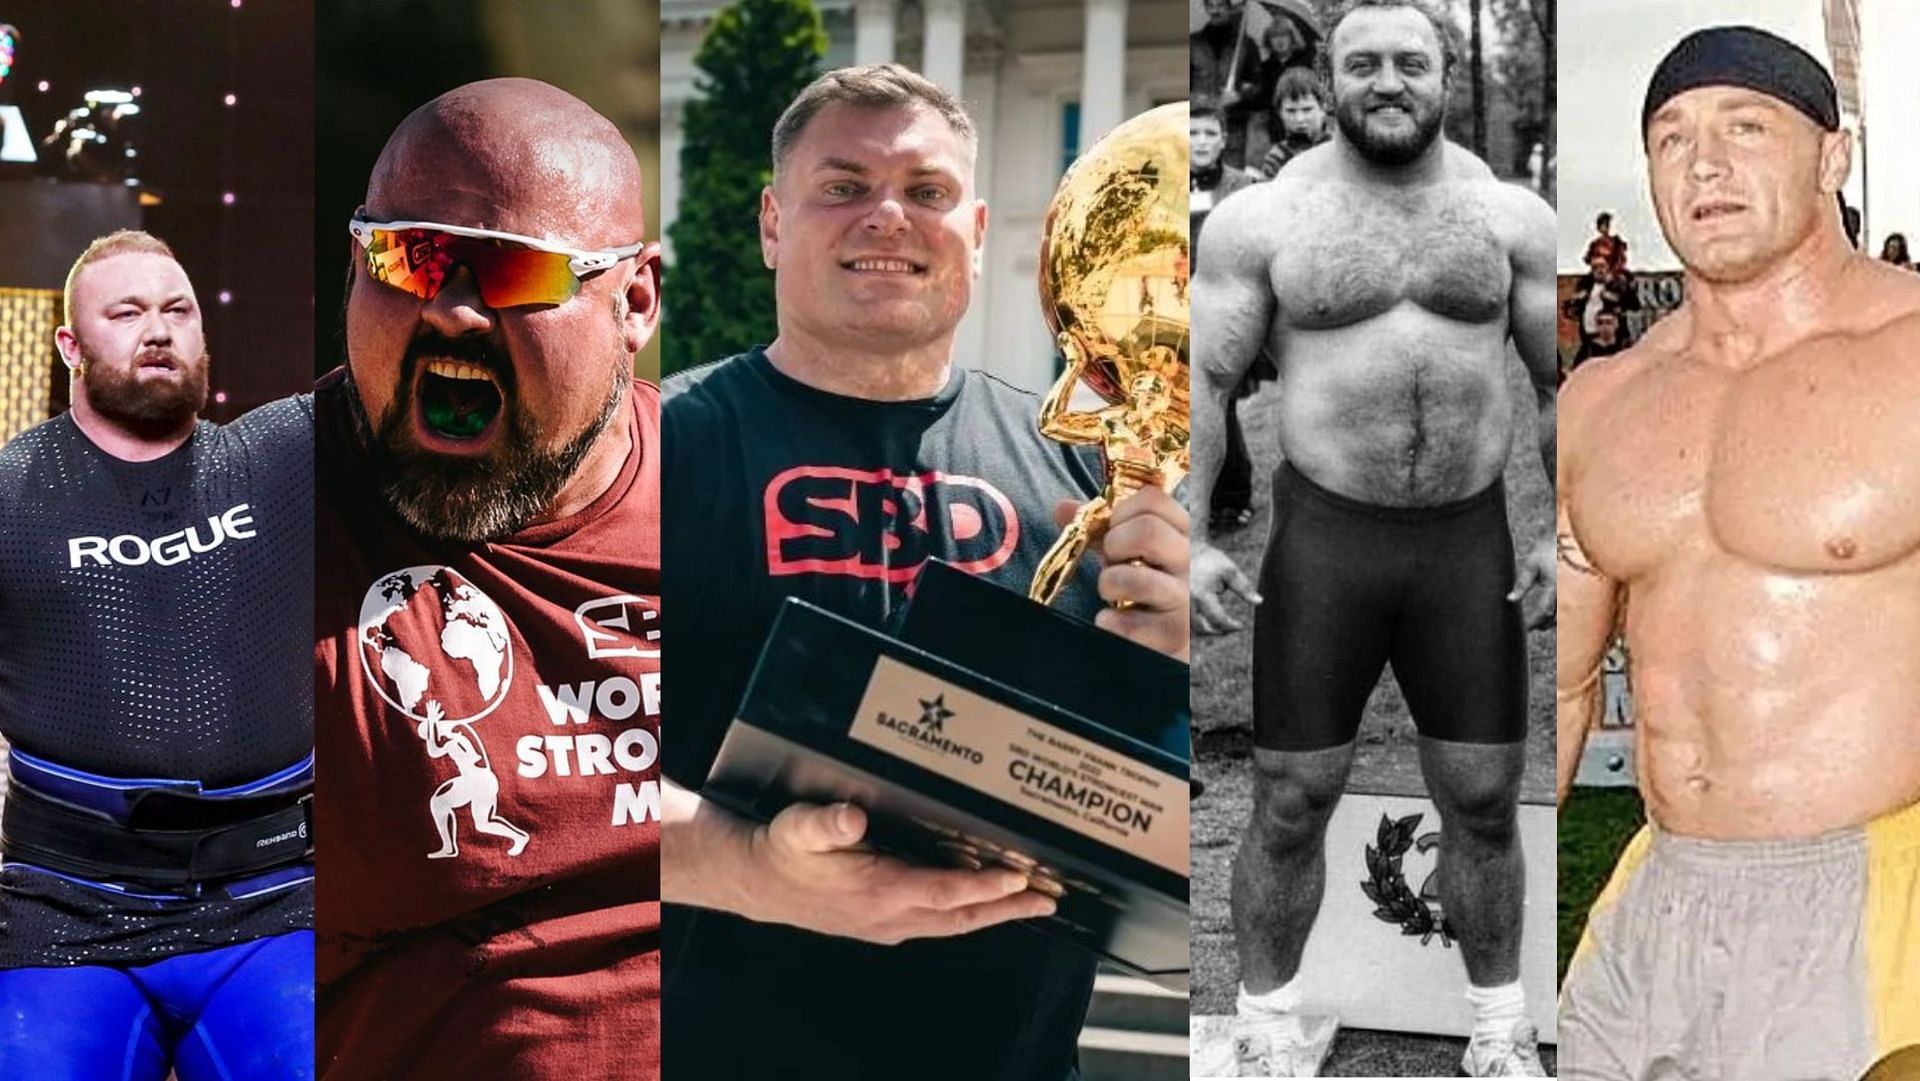 WHAT IT TAKES TO BE THE WORLD'S STRONGEST MAN